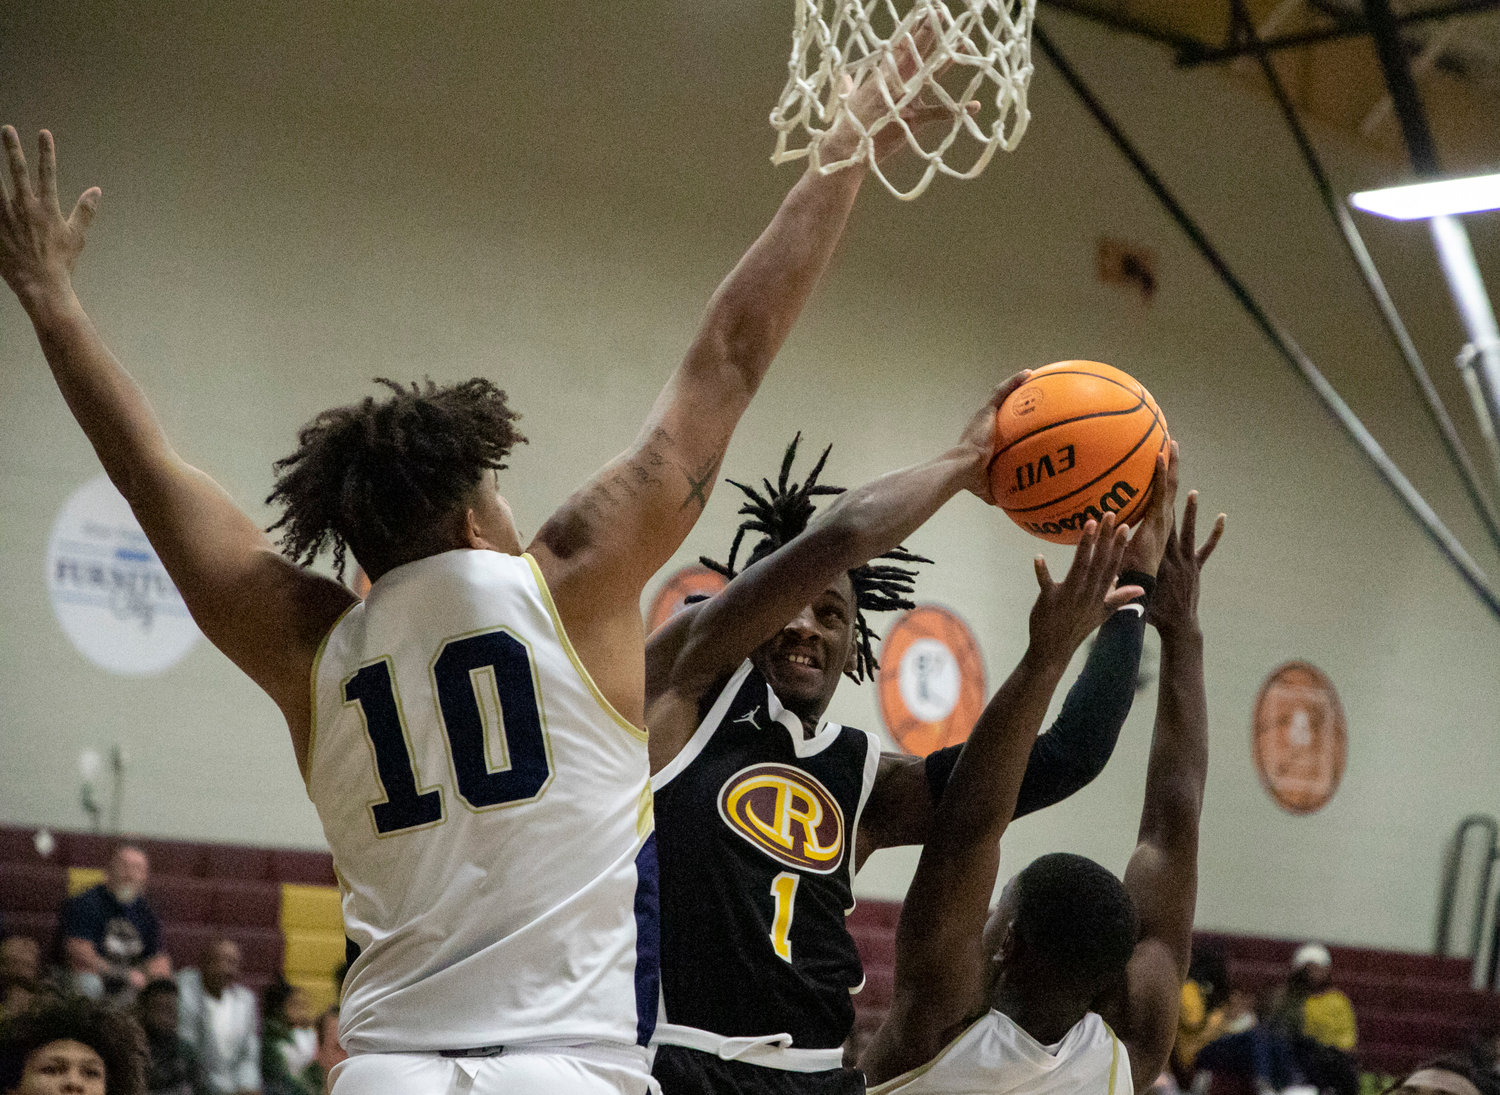 Robertsdale senior Glen Williams (1) attacks the rim with defense from Foley senior Cam Schultz (10) during the opening-round matchup between the Golden Bears and Lions at the Pre-Thanksgiving Tournament at Robertsdale High School Saturday, Nov. 19.